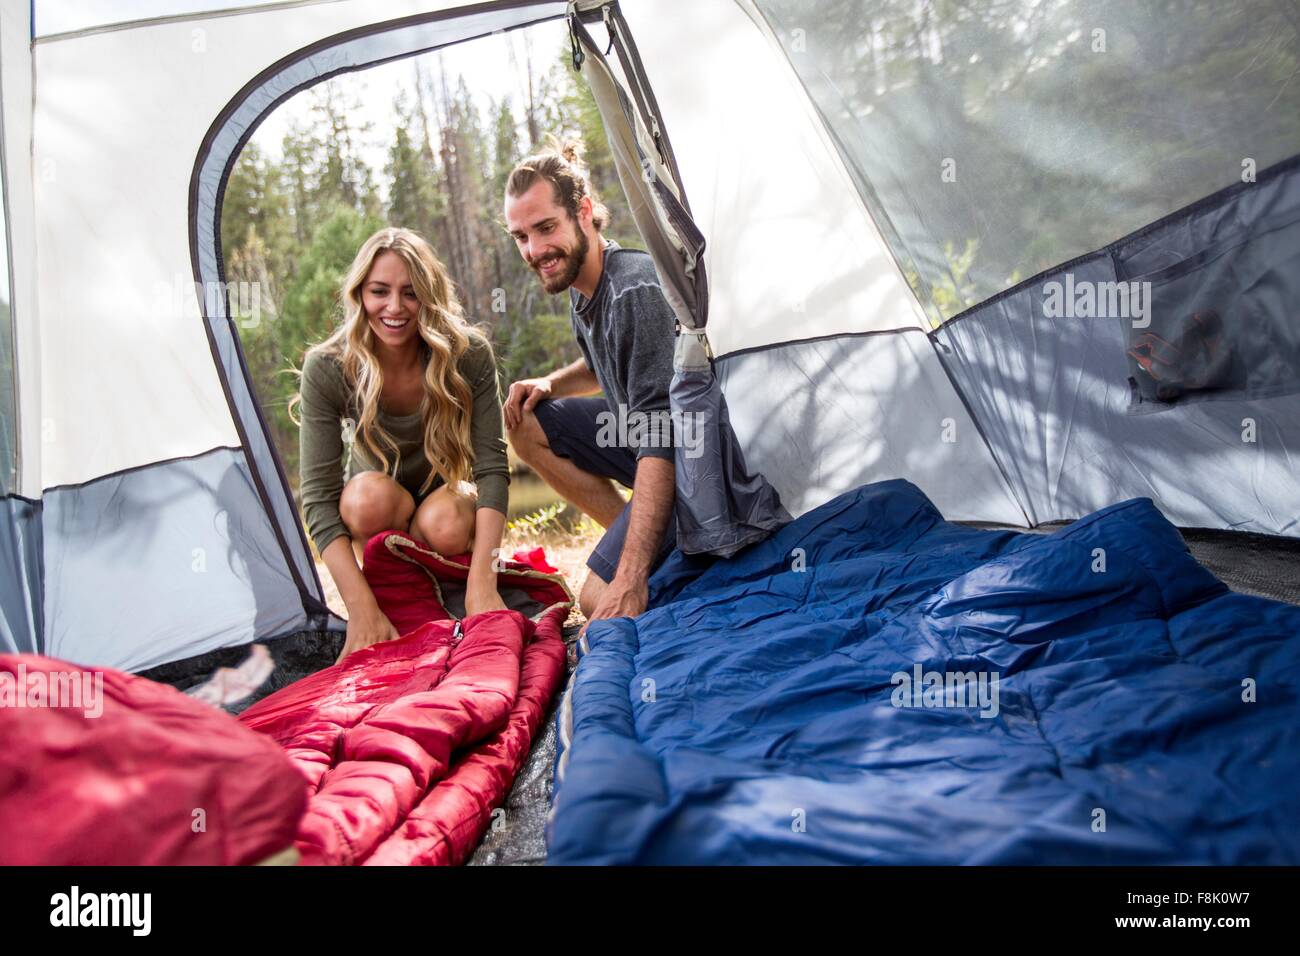 Happy young couple looking into tent, Lake Tahoe, Nevada, USA Stock Photo